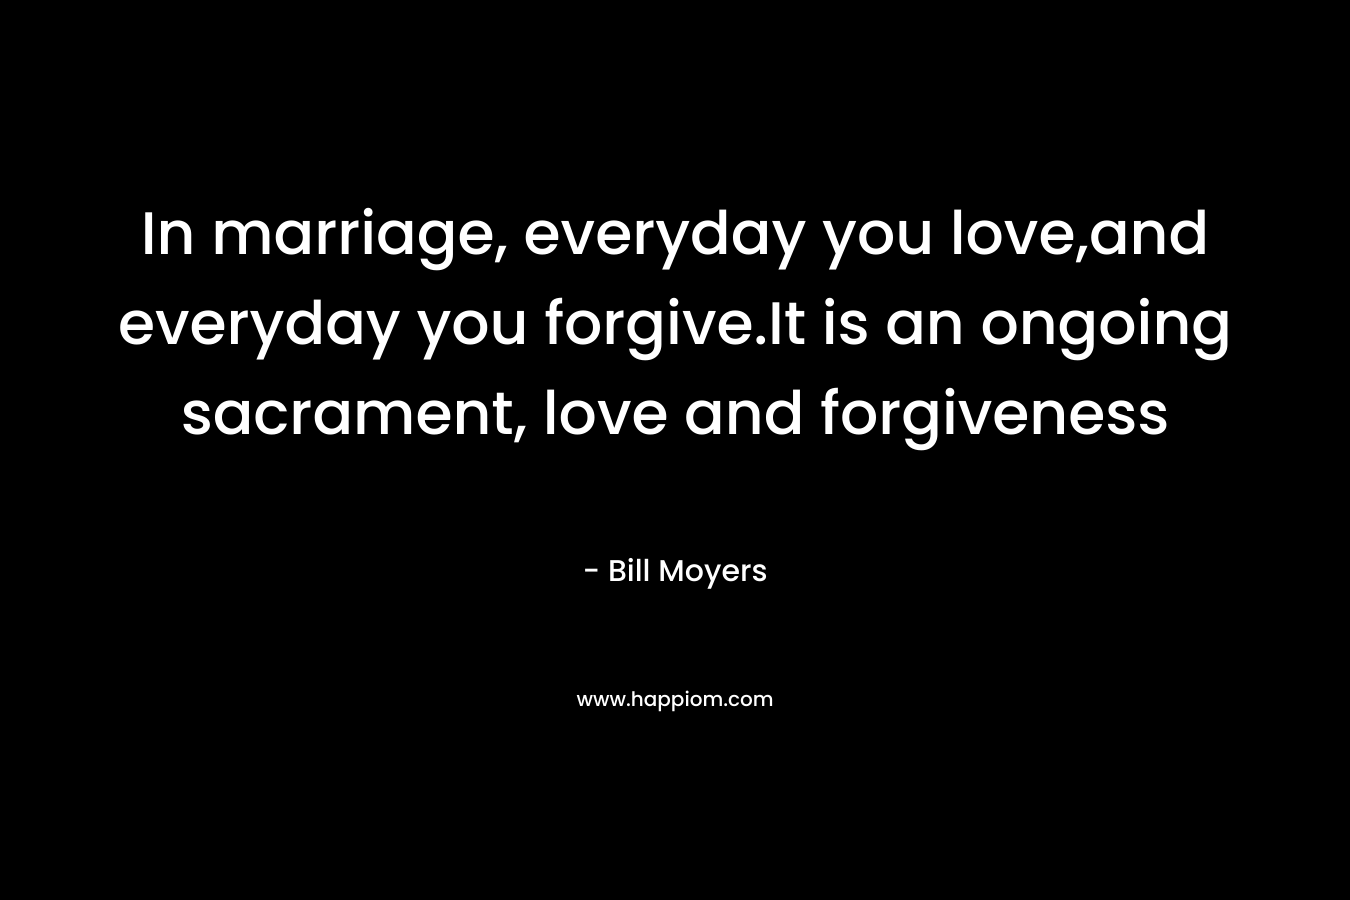 In marriage, everyday you love,and everyday you forgive.It is an ongoing sacrament, love and forgiveness